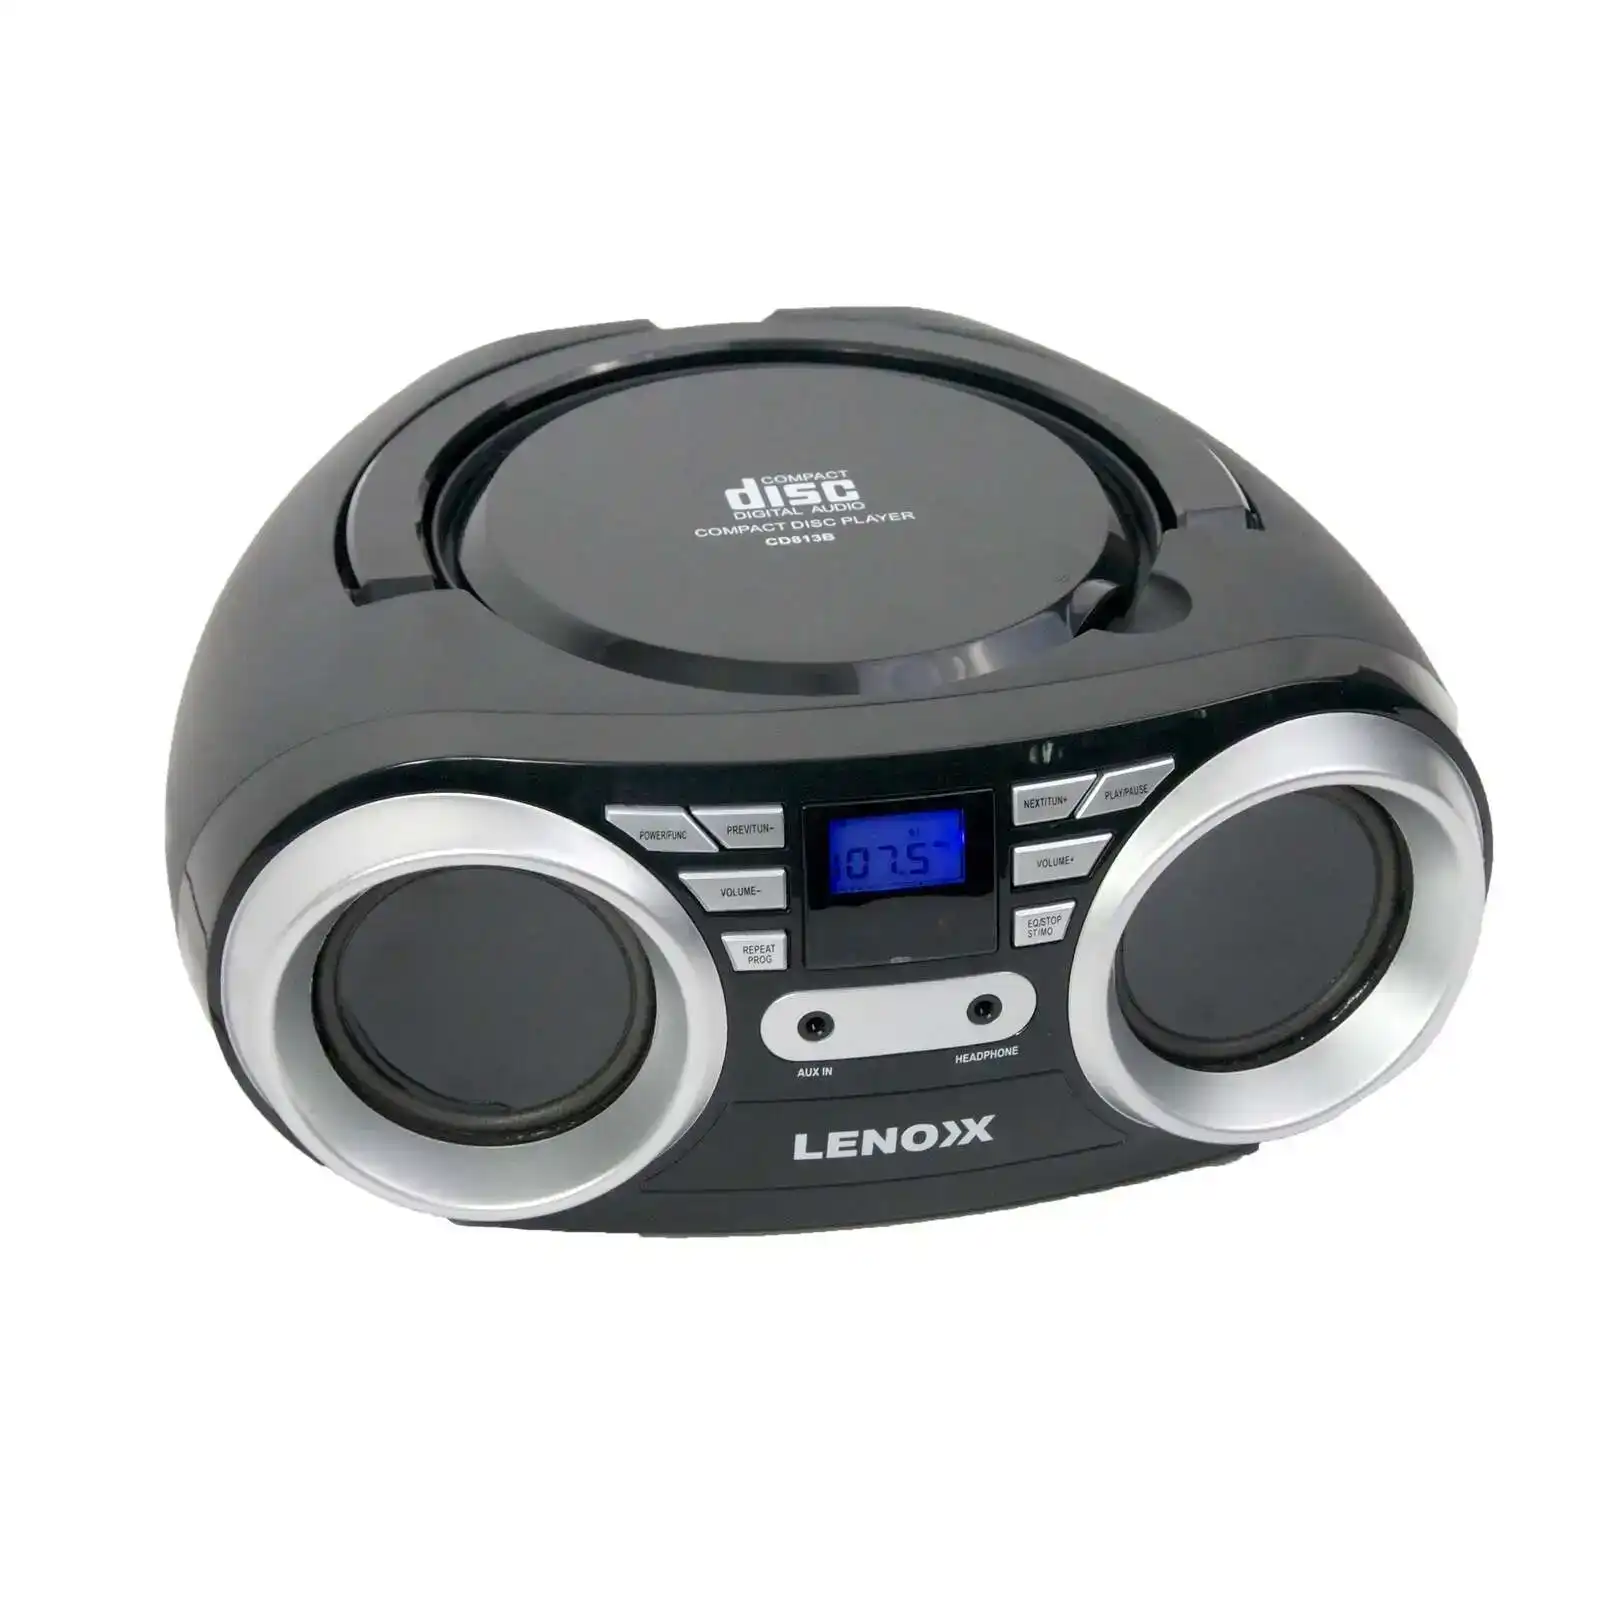 Portable Cd Player - One Size